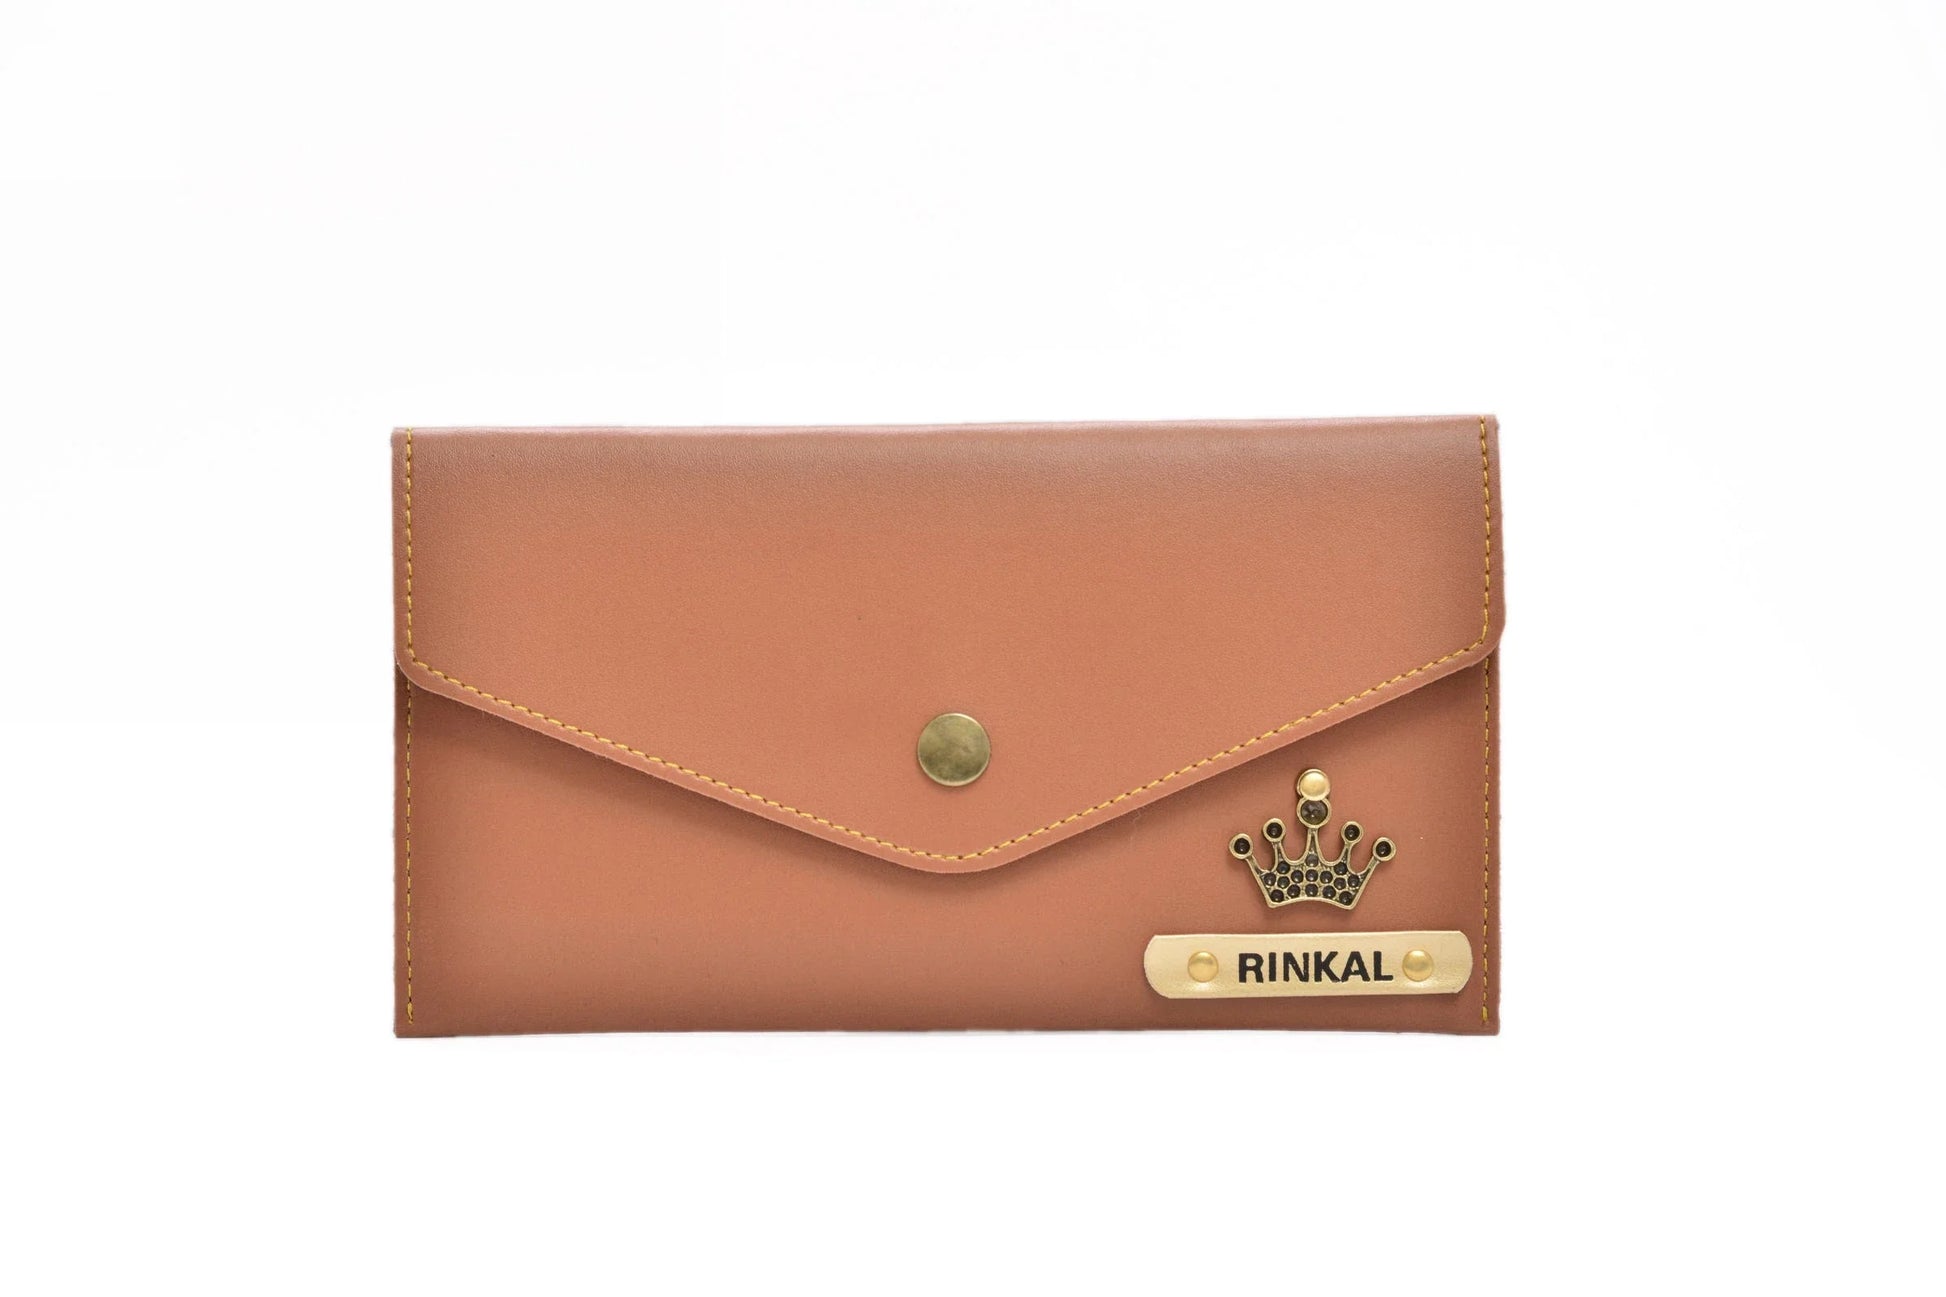 Make a statement with this personalized leather clutch, featuring a unique design of your choice. Perfect for a night out or special occasion.